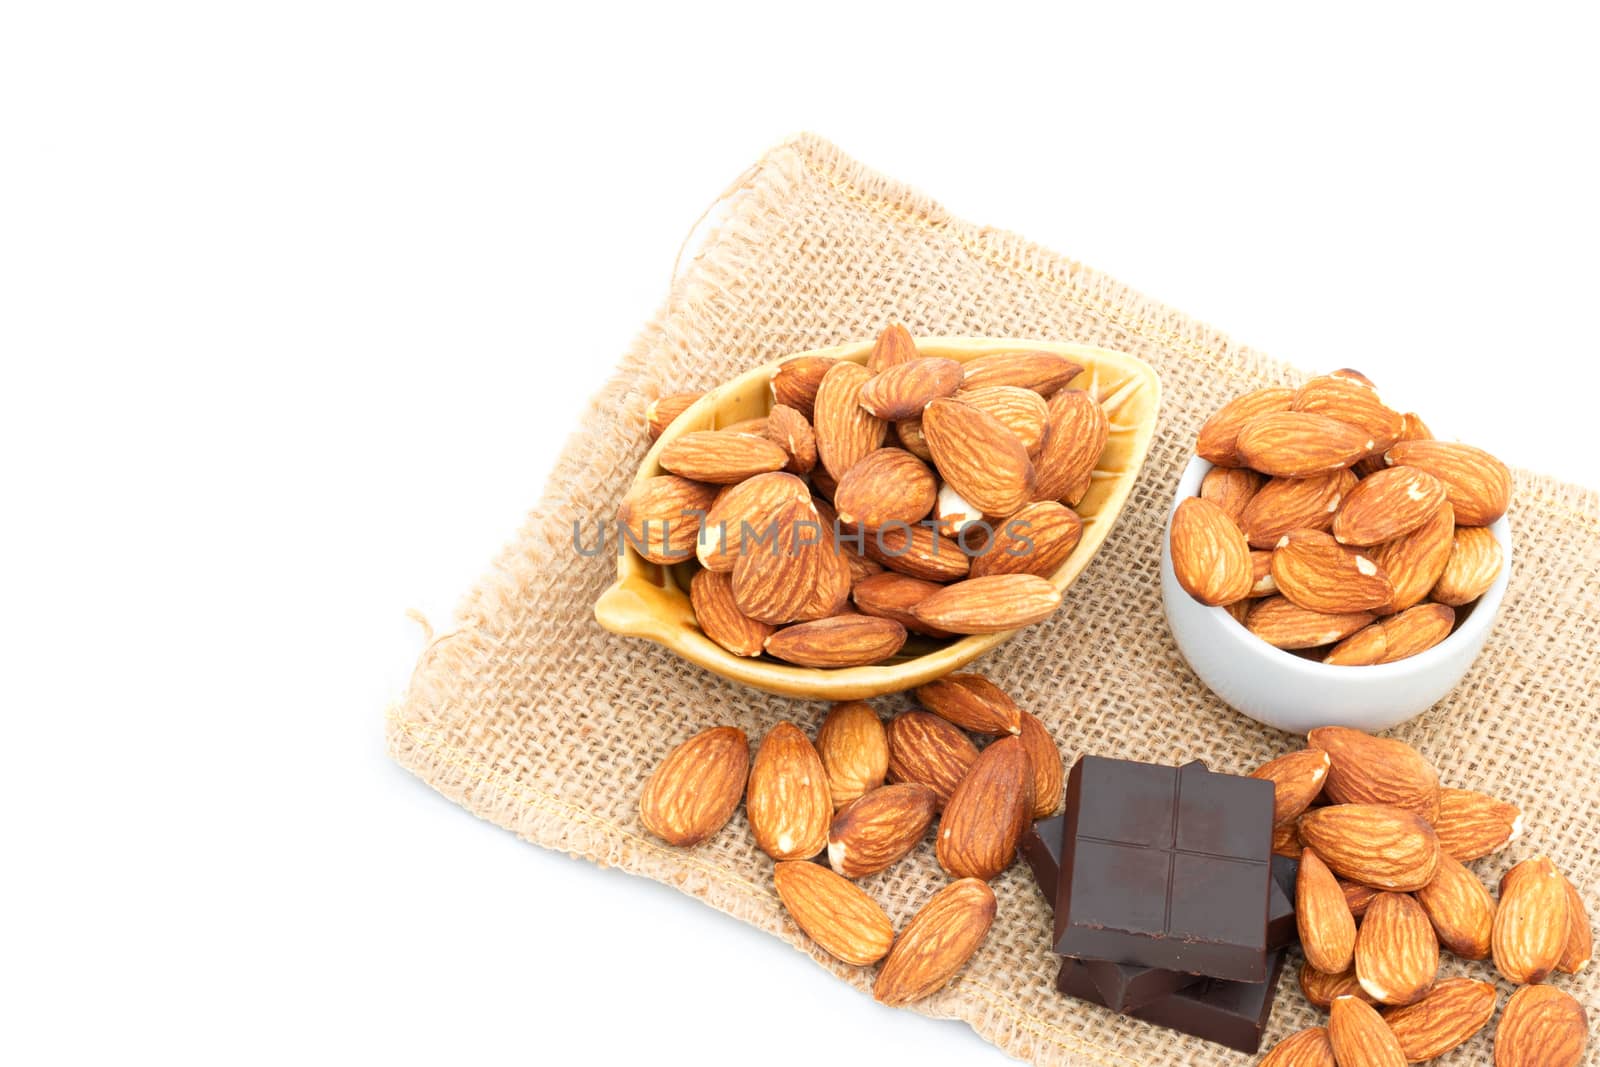 Chocolate and Almonds on a white background